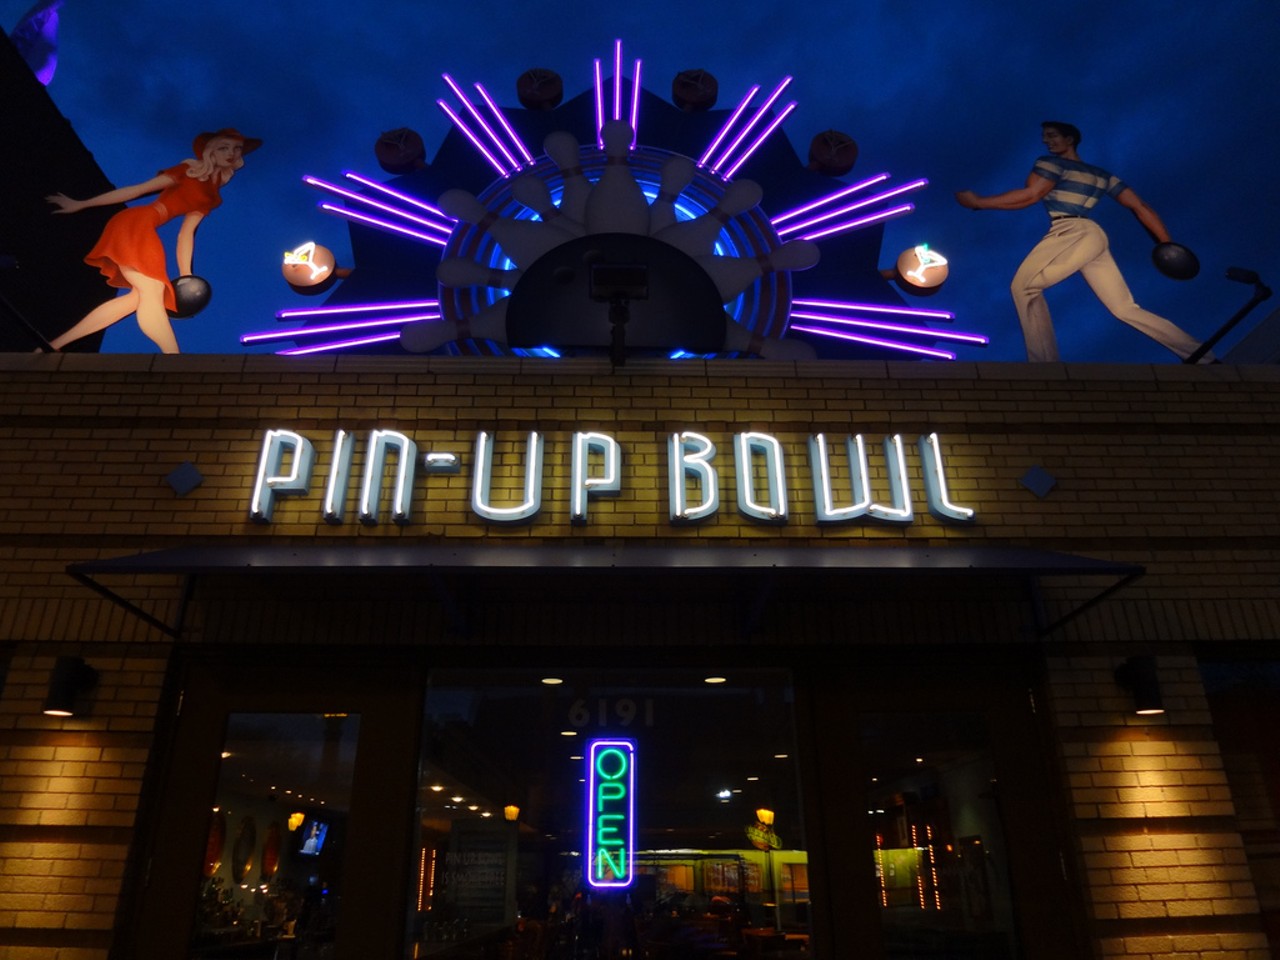 Pin-Up Bowl
(6191 Delmar Boulevard; 314-727-5555)
This longtime Loop hotspot is a 21-and-up bar at night but during the day it operates like any other bowling alley. Your kids will love the style of the place and the small, exclusive bowling area, and you will love that the employees there know how to make a proper drink. Everybody bowls better when they're a little drunk, anyway.
Photo credit: <a href="https://www.flickr.com/photos/pasa/6343359838/in/photolist-aExnT5-8fhEF4-8fhFFx-8fhEwz-8fhFtP-8fhDYa-8fhEoK-8fkWML-8fkWoJ-8fkWWj-8fhEVn-8fkWDL-d6wTQb-arLJL9-aEtwFk-4ZRtu2-FnCBKF-fwfSPG-3jzdZ-RwdbEq-6nuBRi-4RQfA-4RQfo-egyvL-6u8XJm-z1CZN-eh8A3B-7LLiZM-sWBHv-5f3ocG-RYBbNM-cWsW25-s6Huc-cWsVQd-cWsXkj-QUfB73-71ZqRK-cETkLo-7LQgko-S6YTG1-7UrNXi-aCs5M